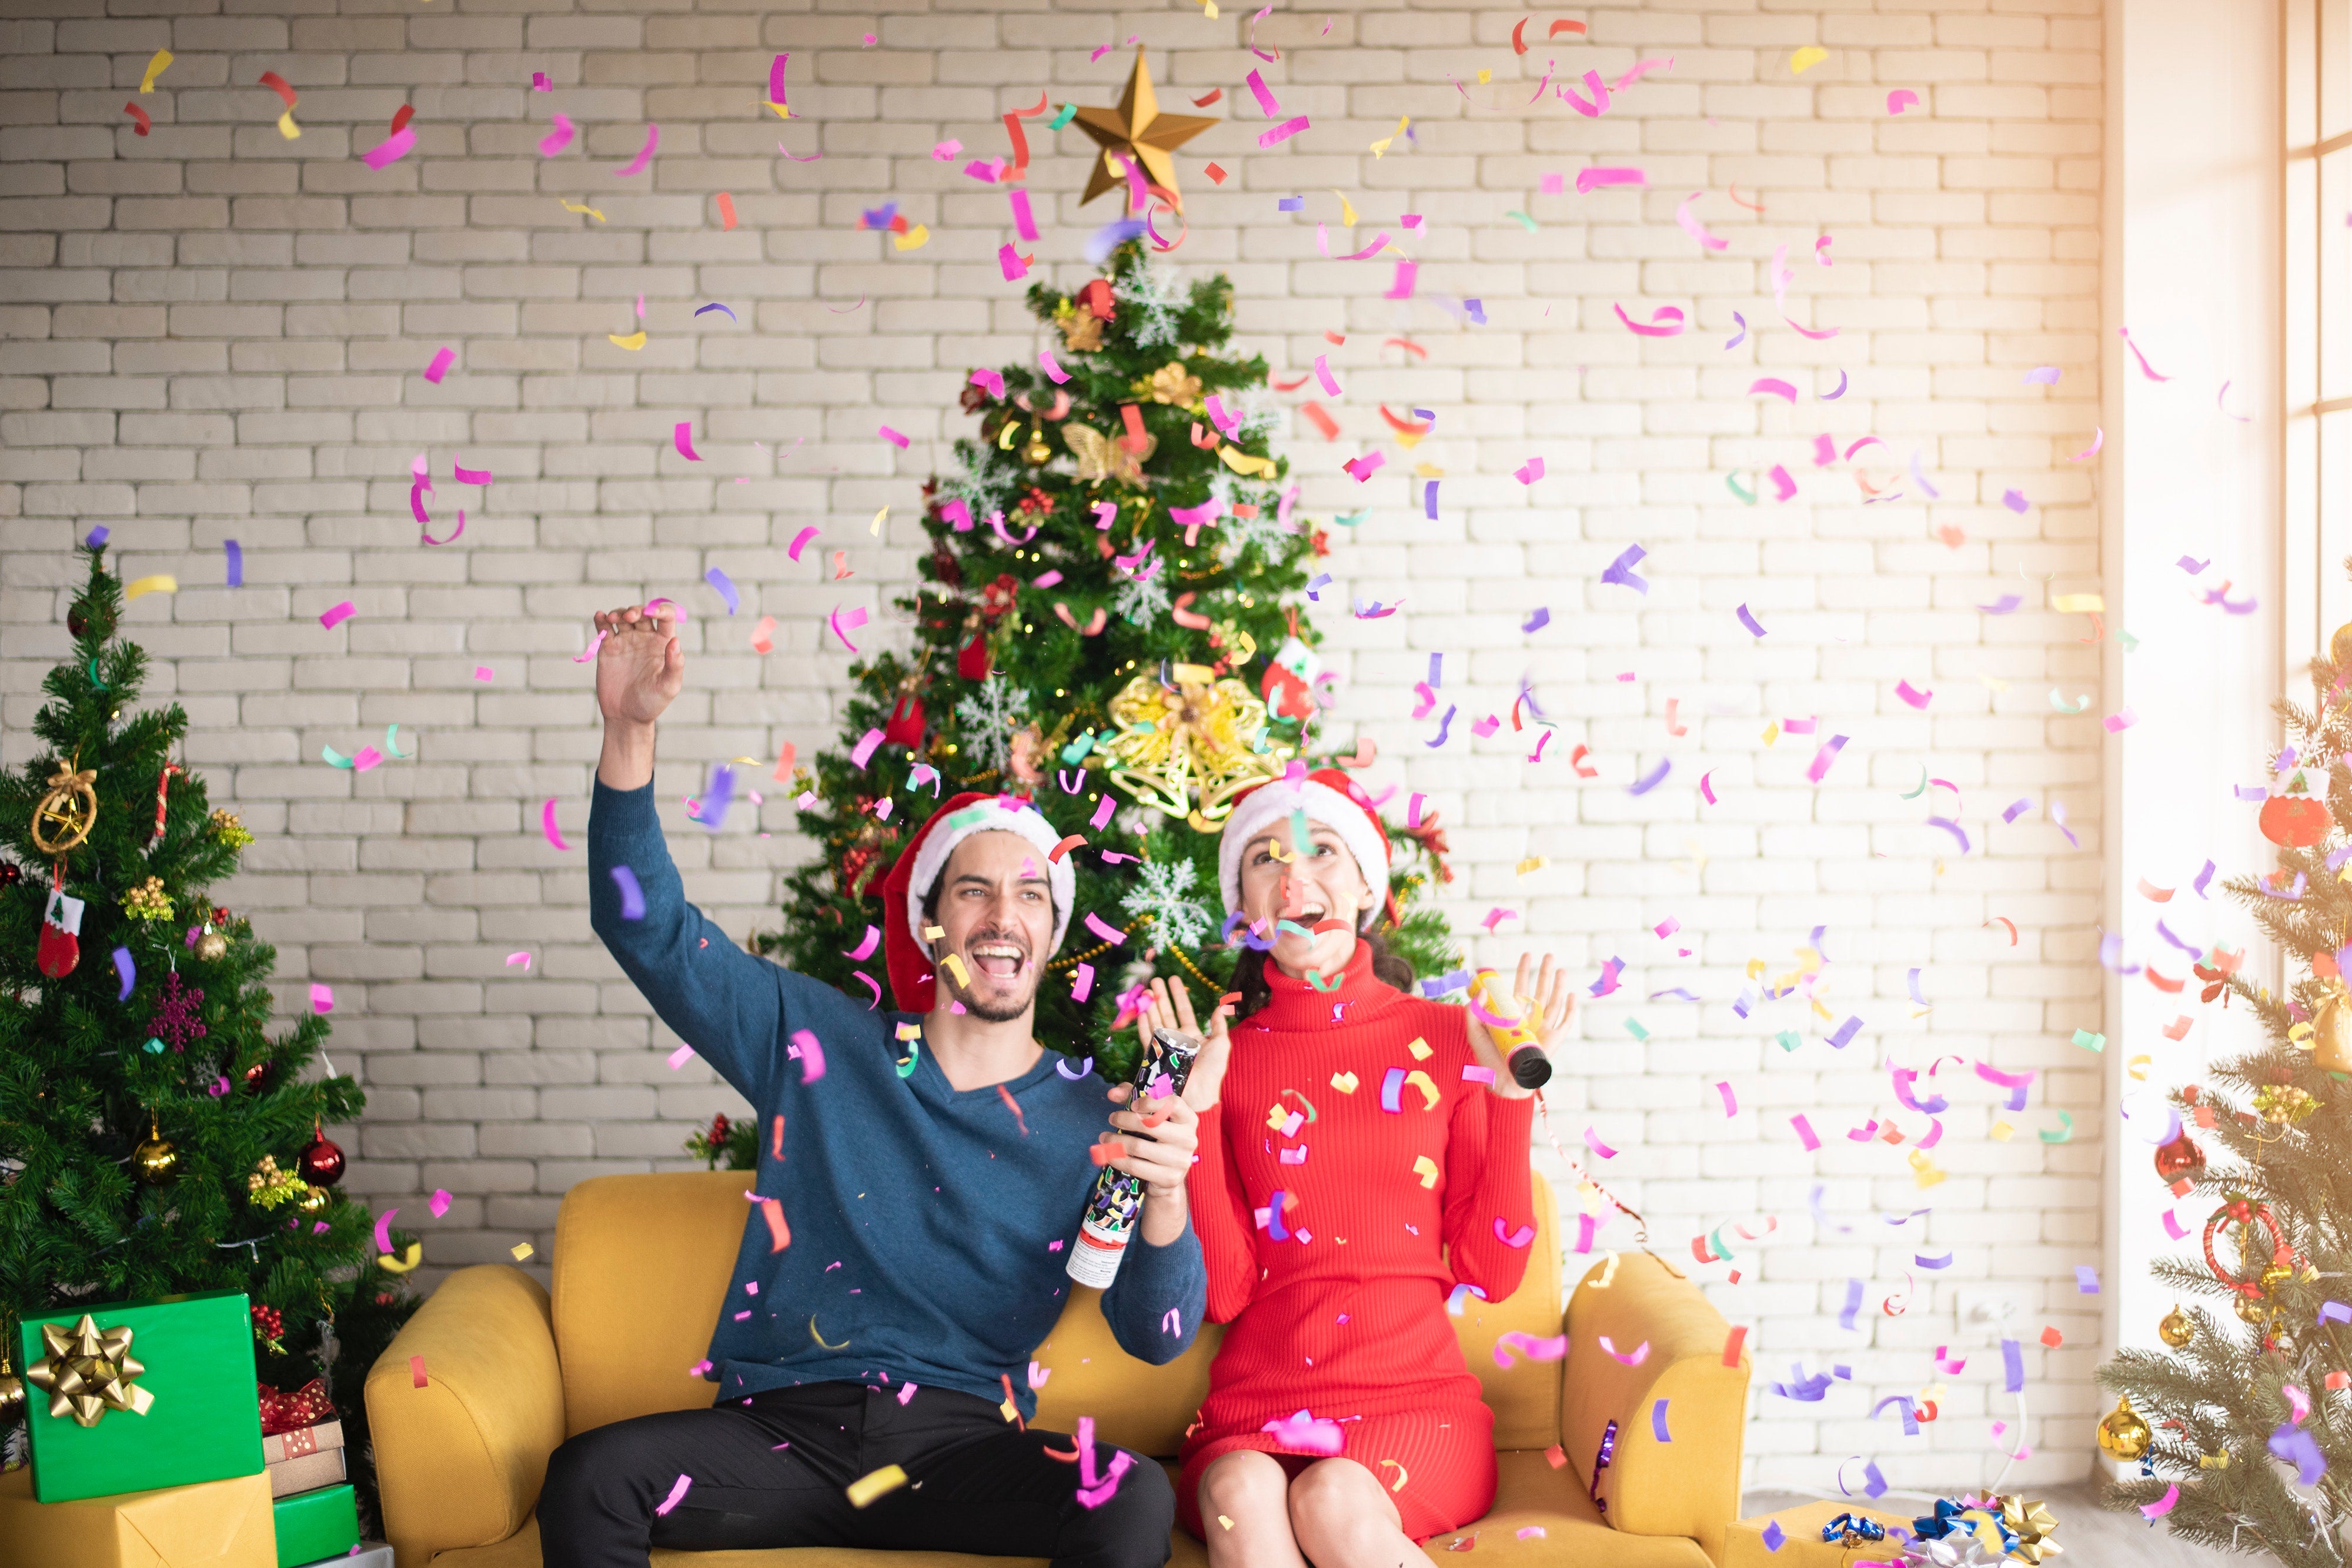 10 Christmas Party Decorations To Make Your Christmas Perfect！